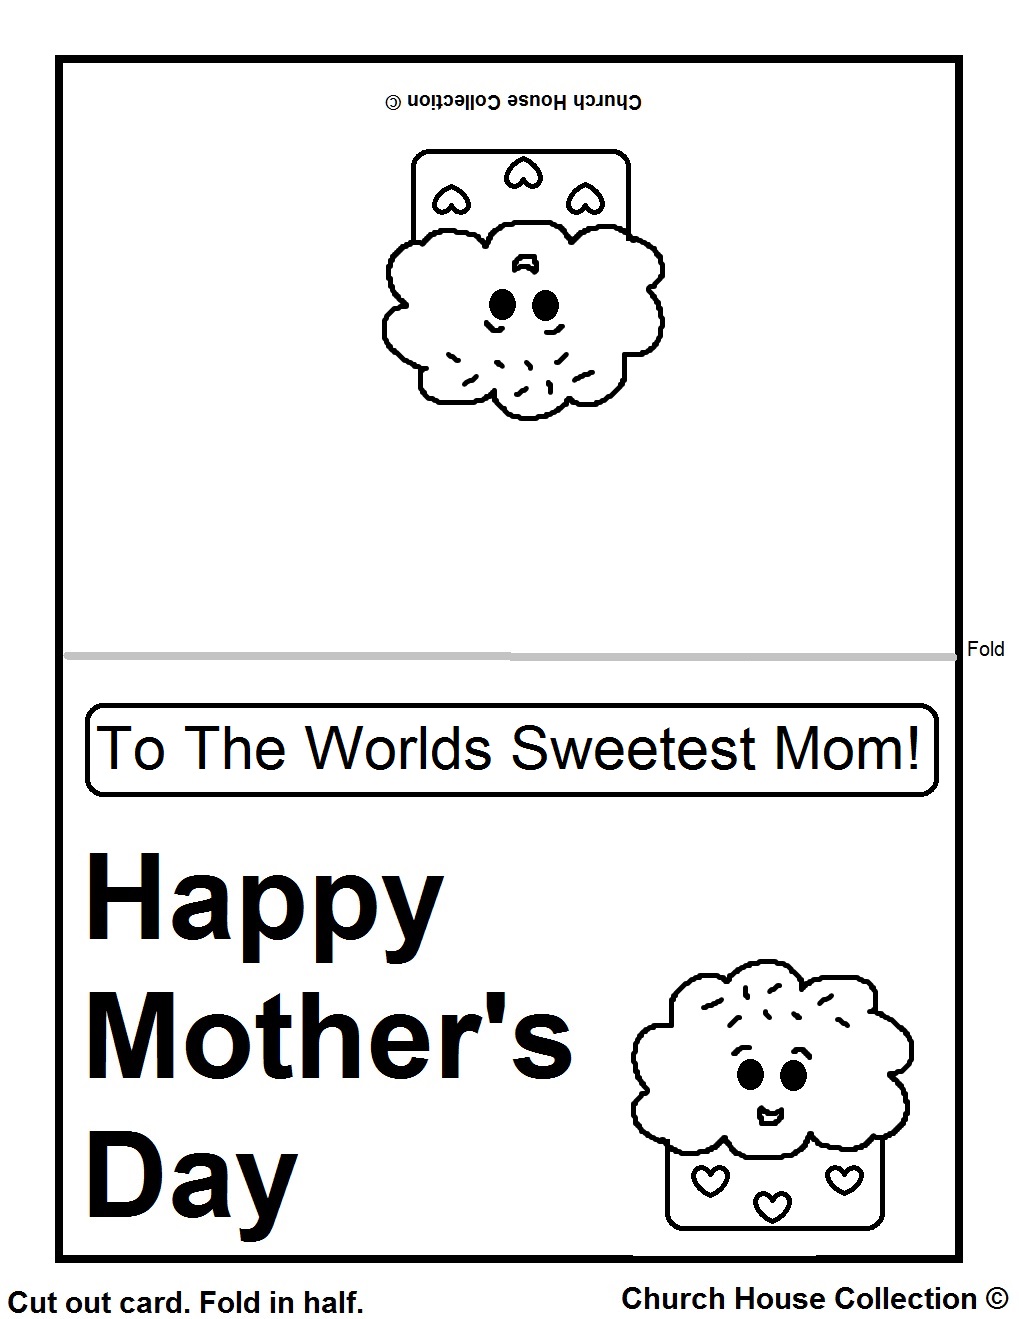 church-house-collection-blog-printable-mother-s-day-cards-for-kids-to